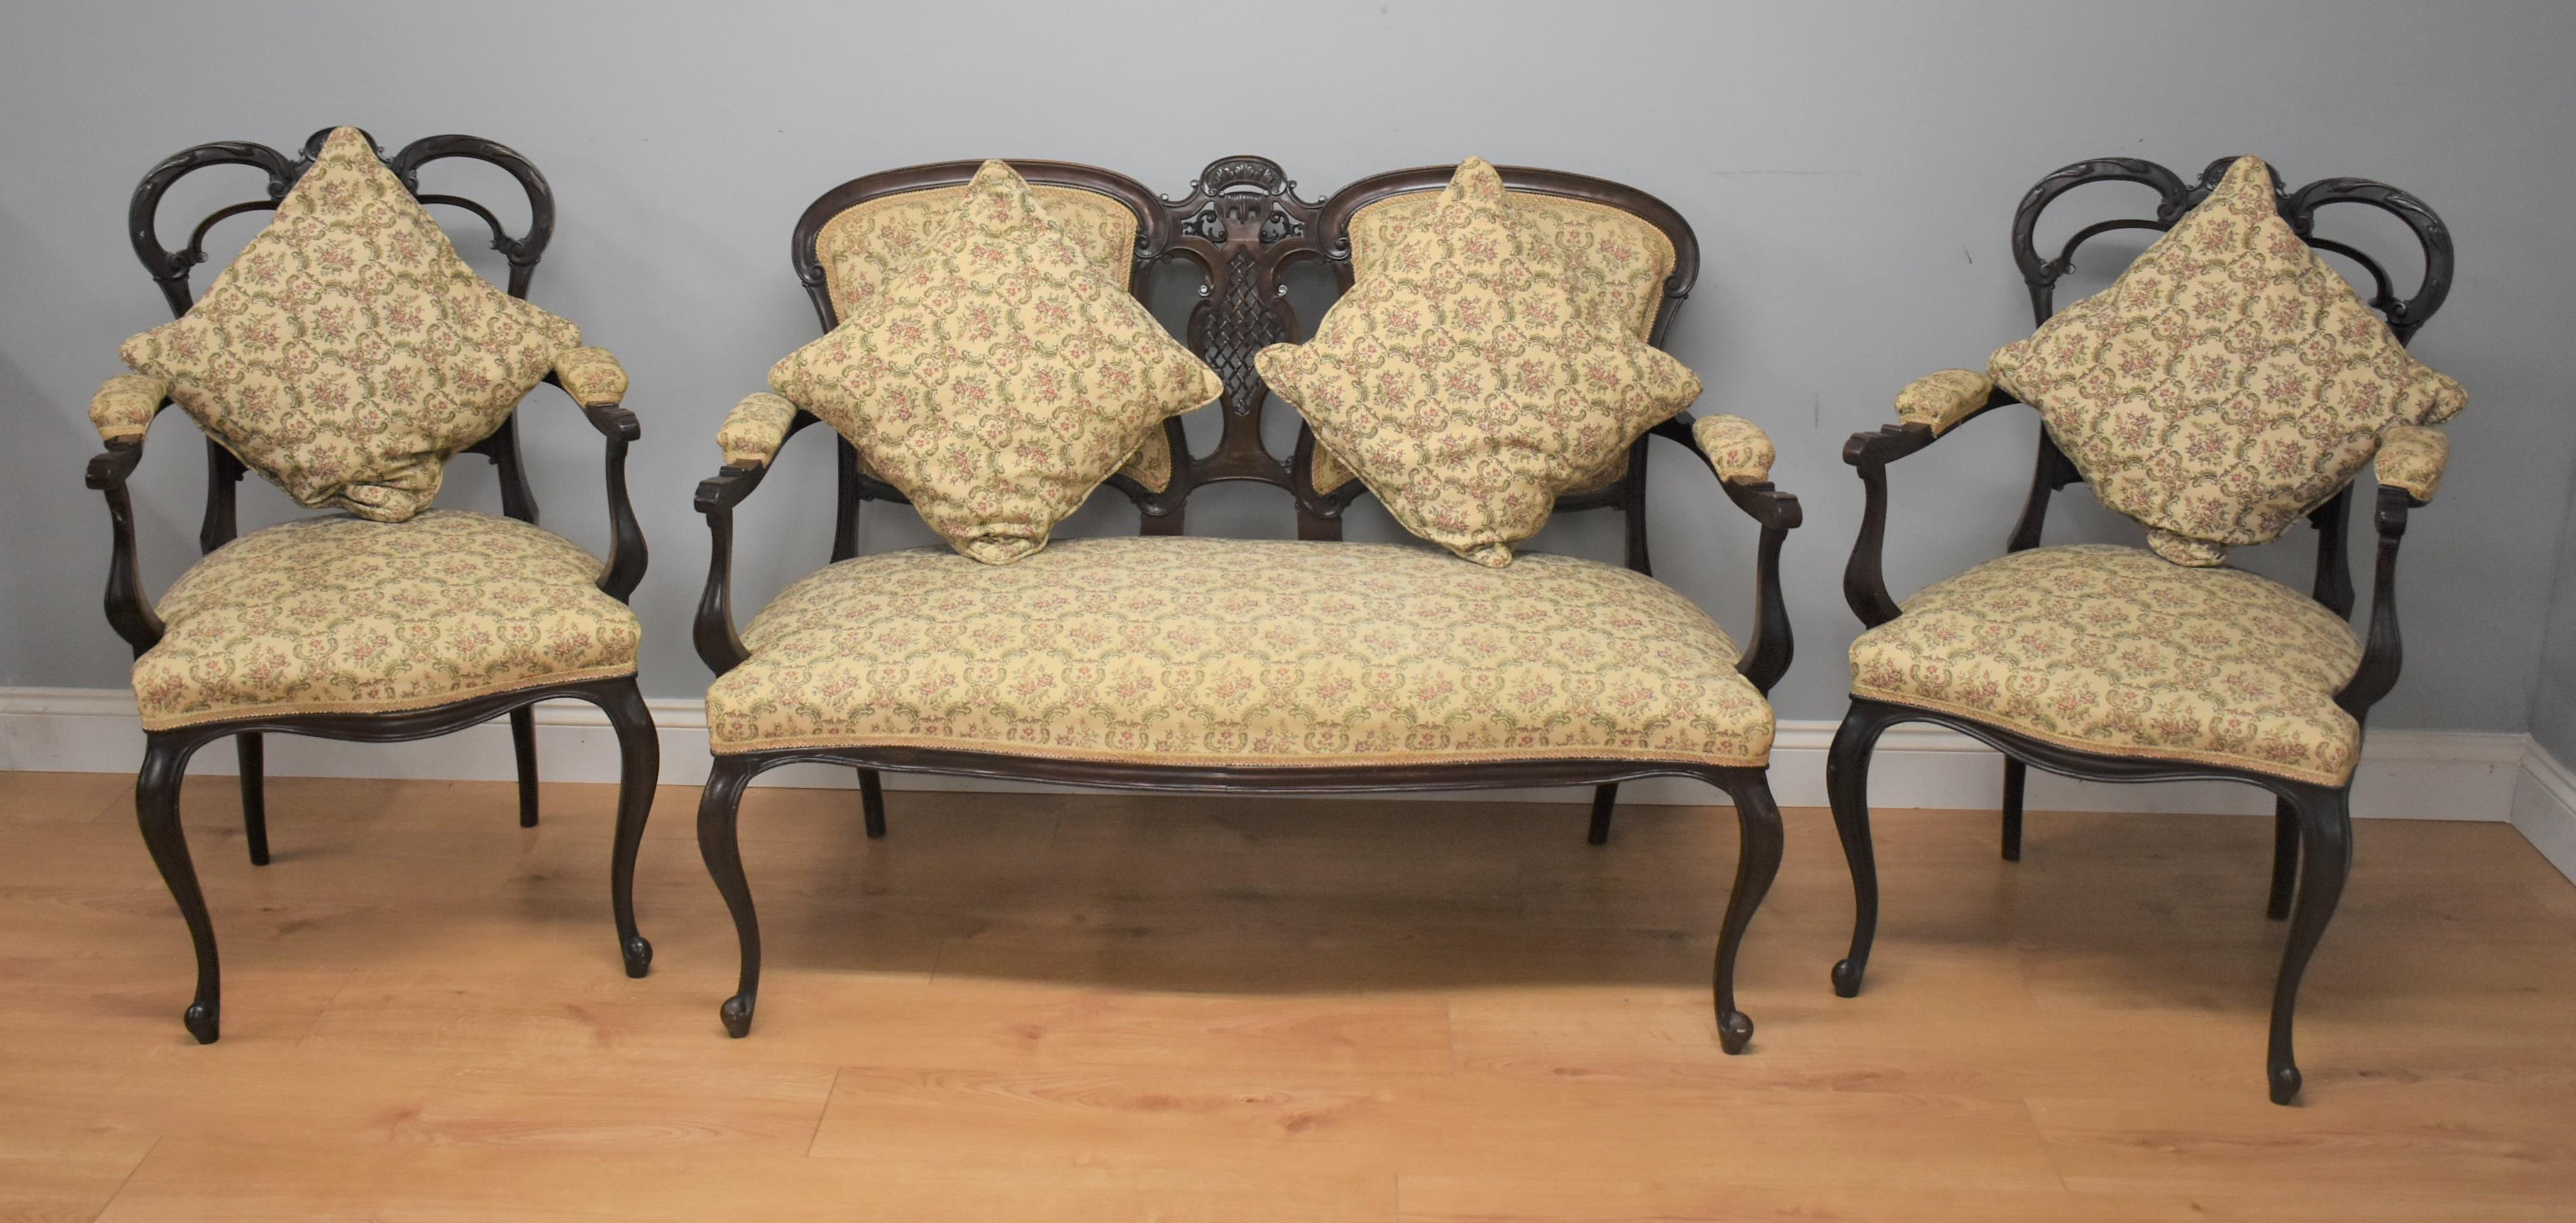 Edwardian mahogany three-piece salon suite comprising a two seat settee and two elbow chairs all with pierced back and standing on cabriol legs.

Measures: Settee width 46